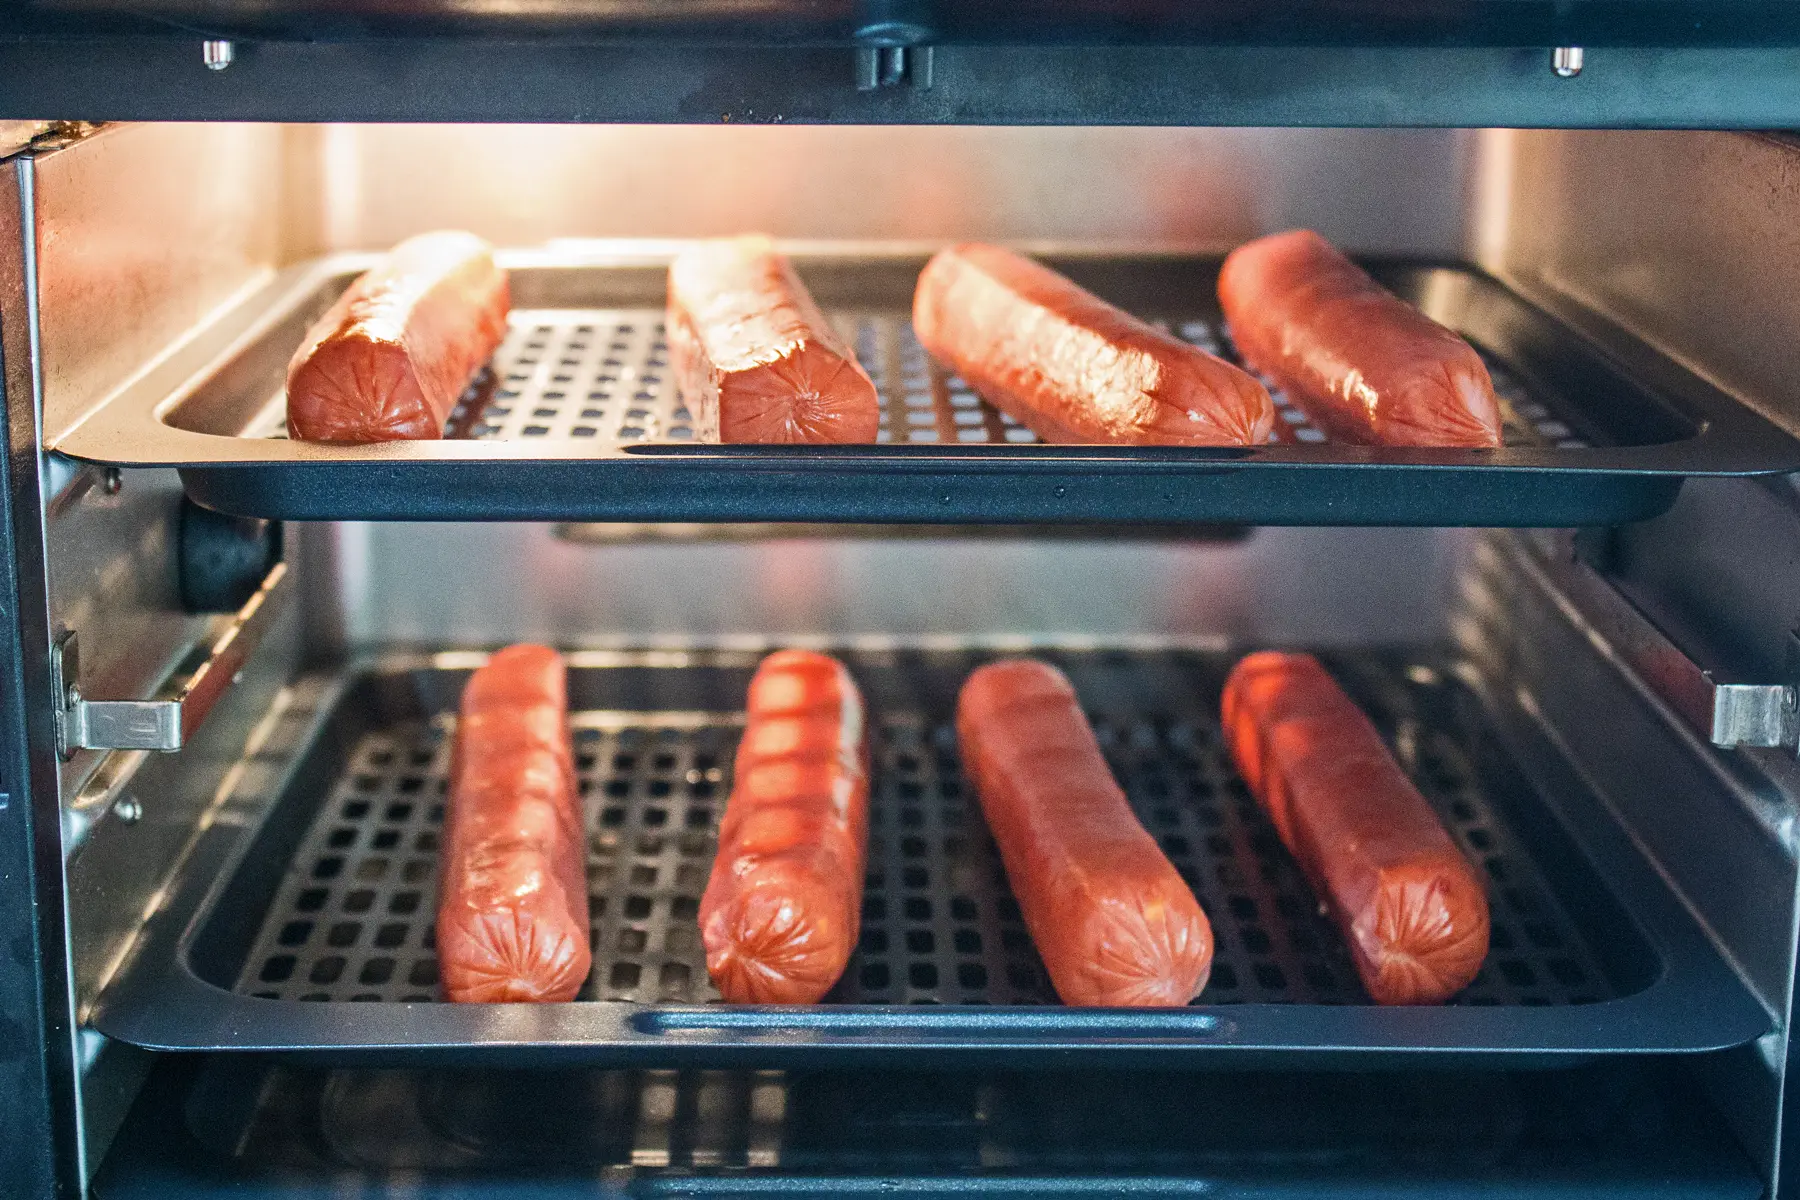 8 hot dogs set on convection oven style air fryer racks and placed in the oven after preheating, ready to cook.